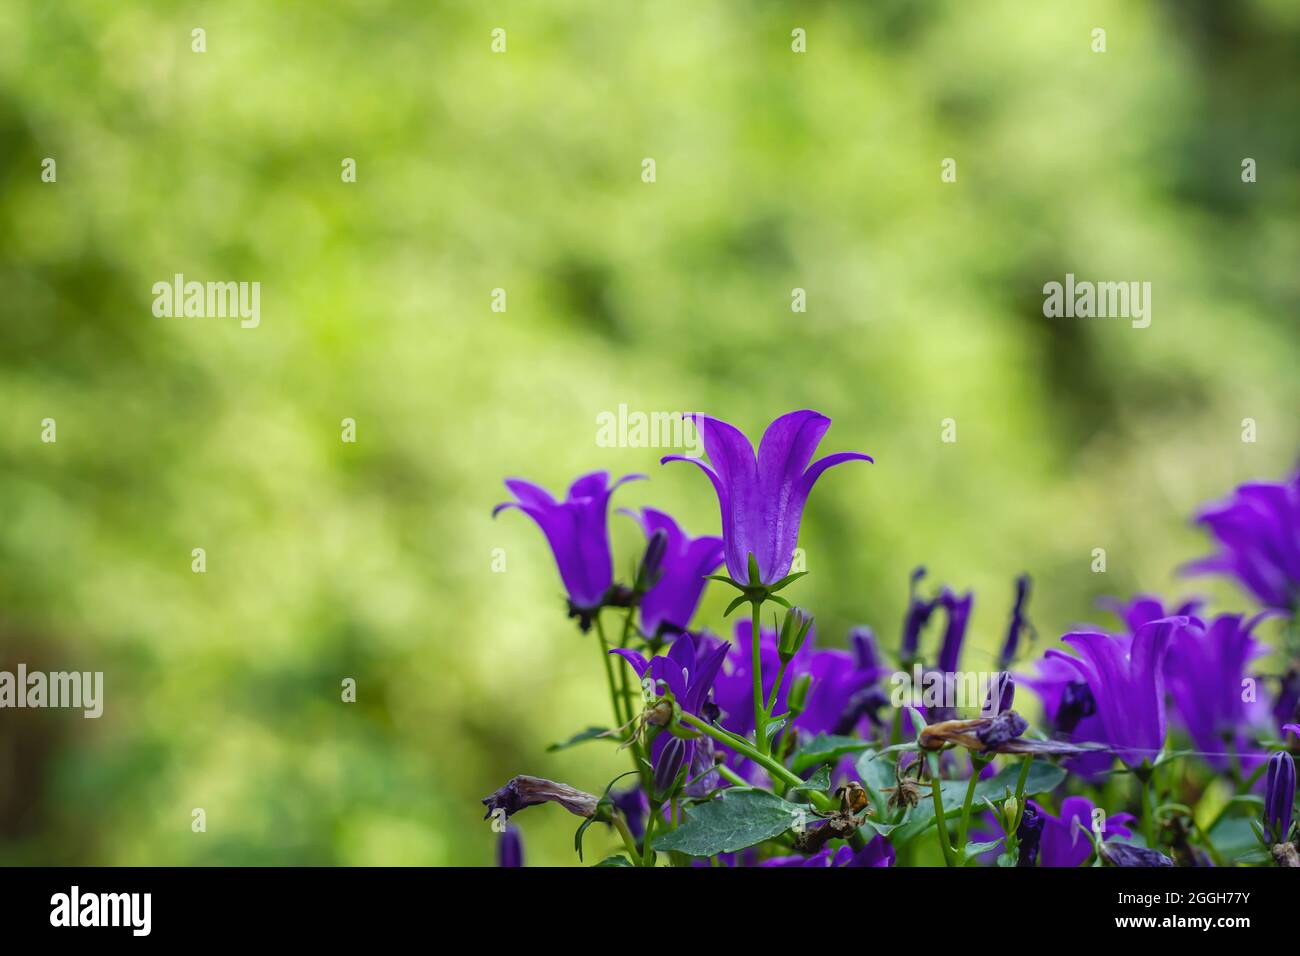 Campanula portenschlagiana, the Dalmatian bellflower with deep purple blooming flowers Stock Photo